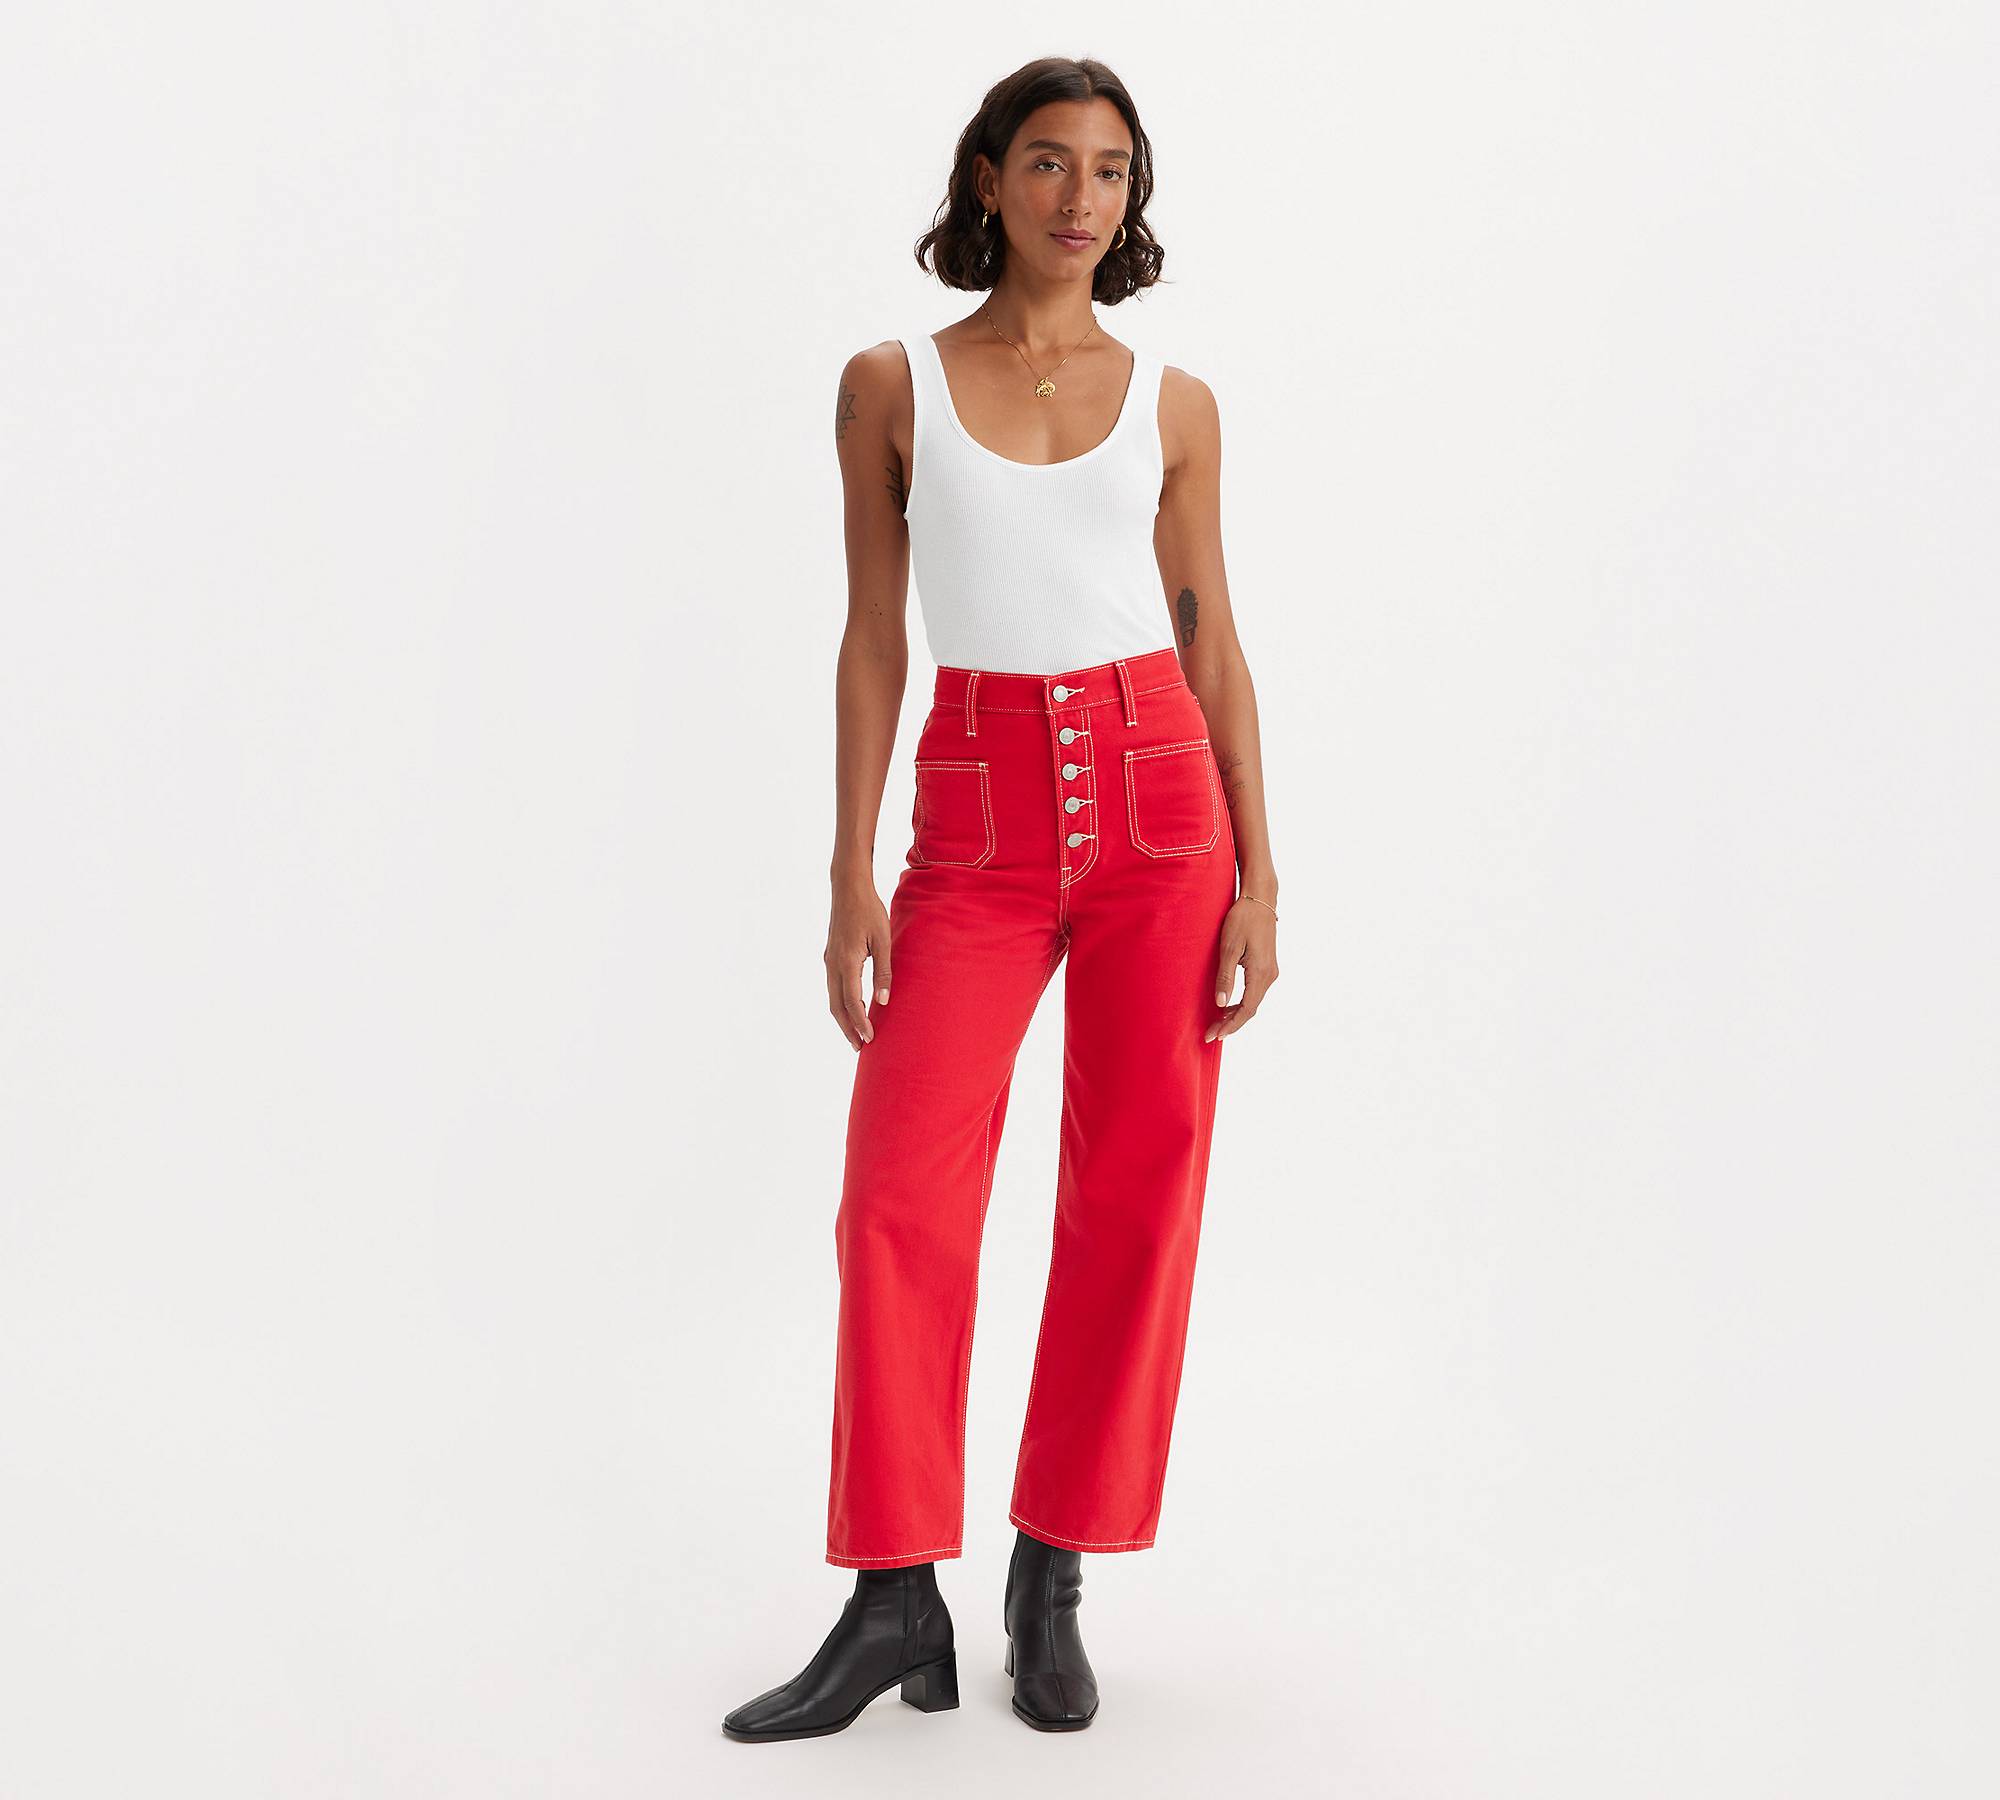 Ribcage Straight Patch Pocket Women's Jeans - Red